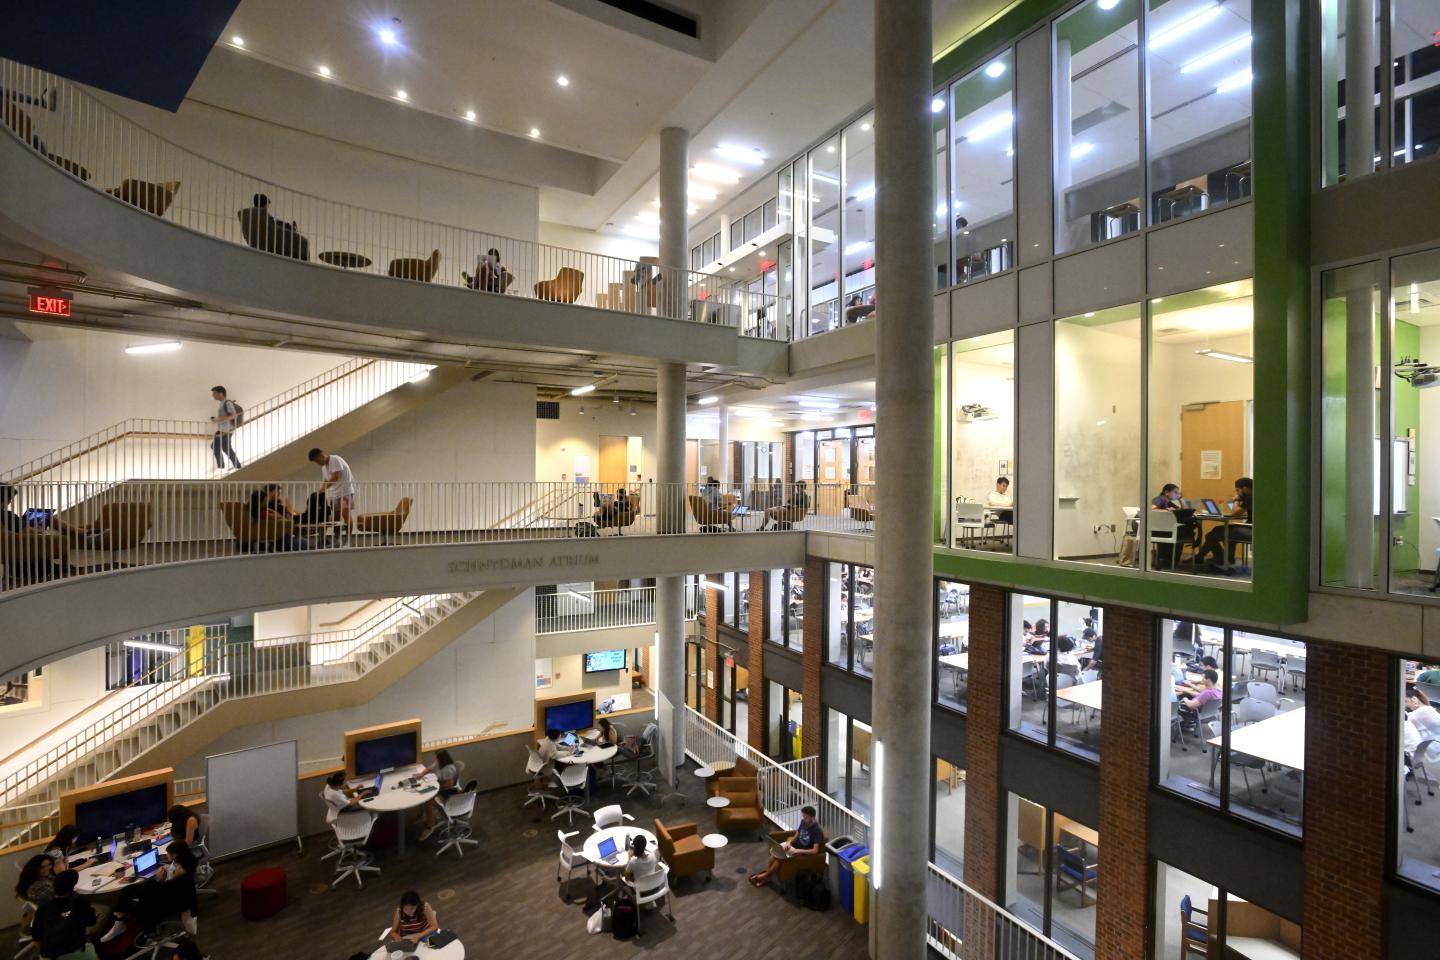 The Brody Learning Commons atrium